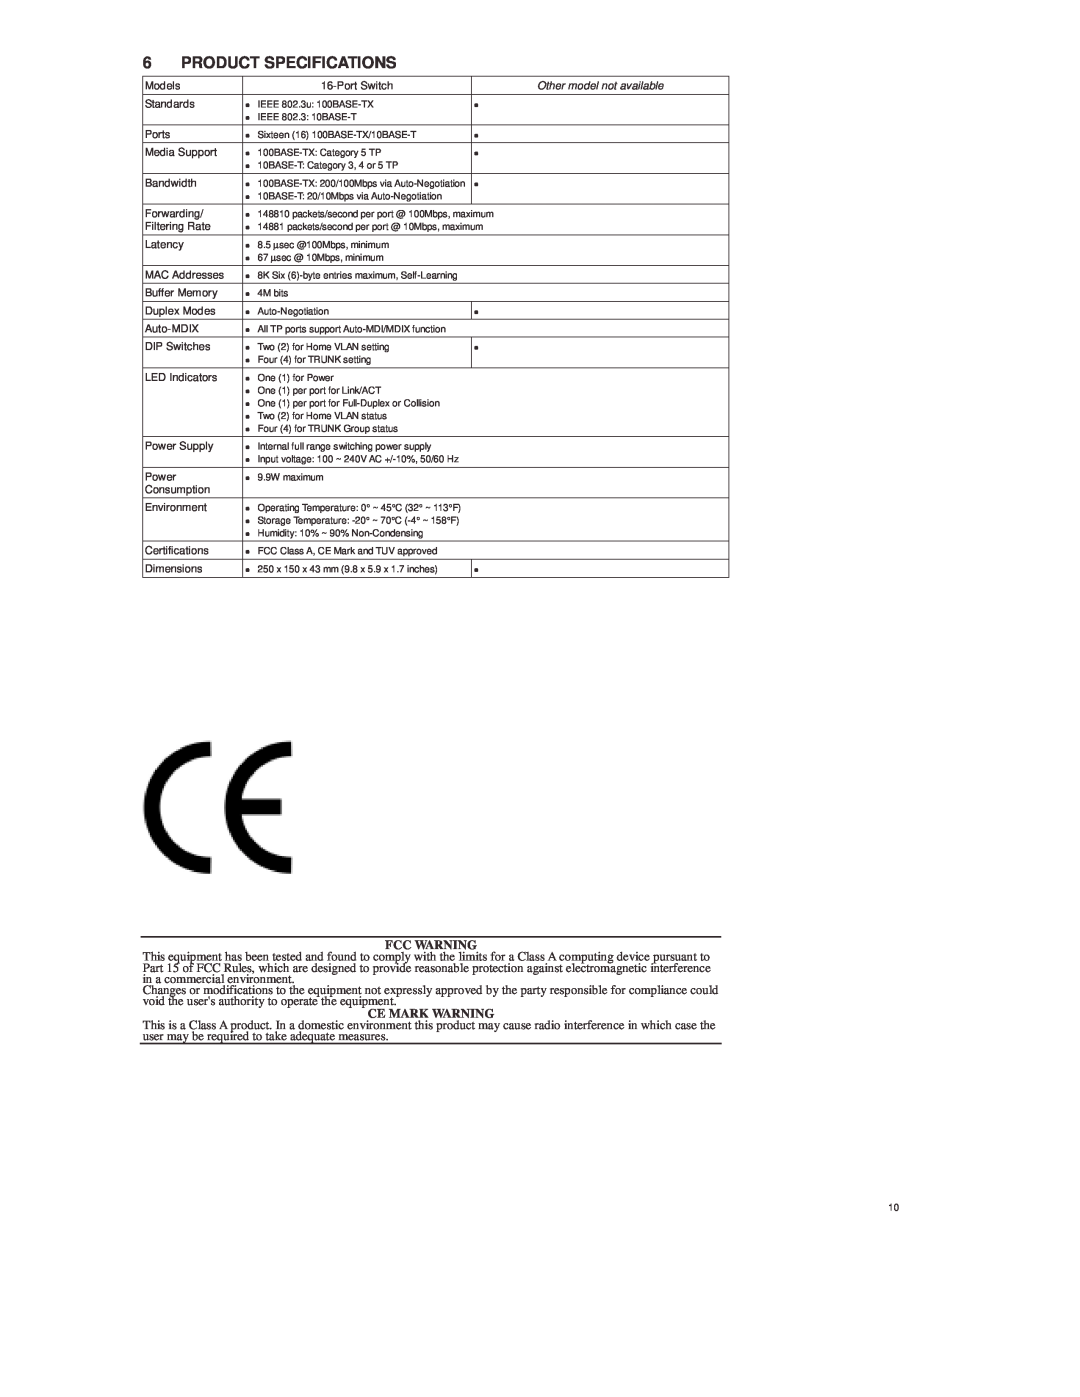 Lindy 25020 manual Product Specifications, Fcc Warning, Ce Mark Warning 